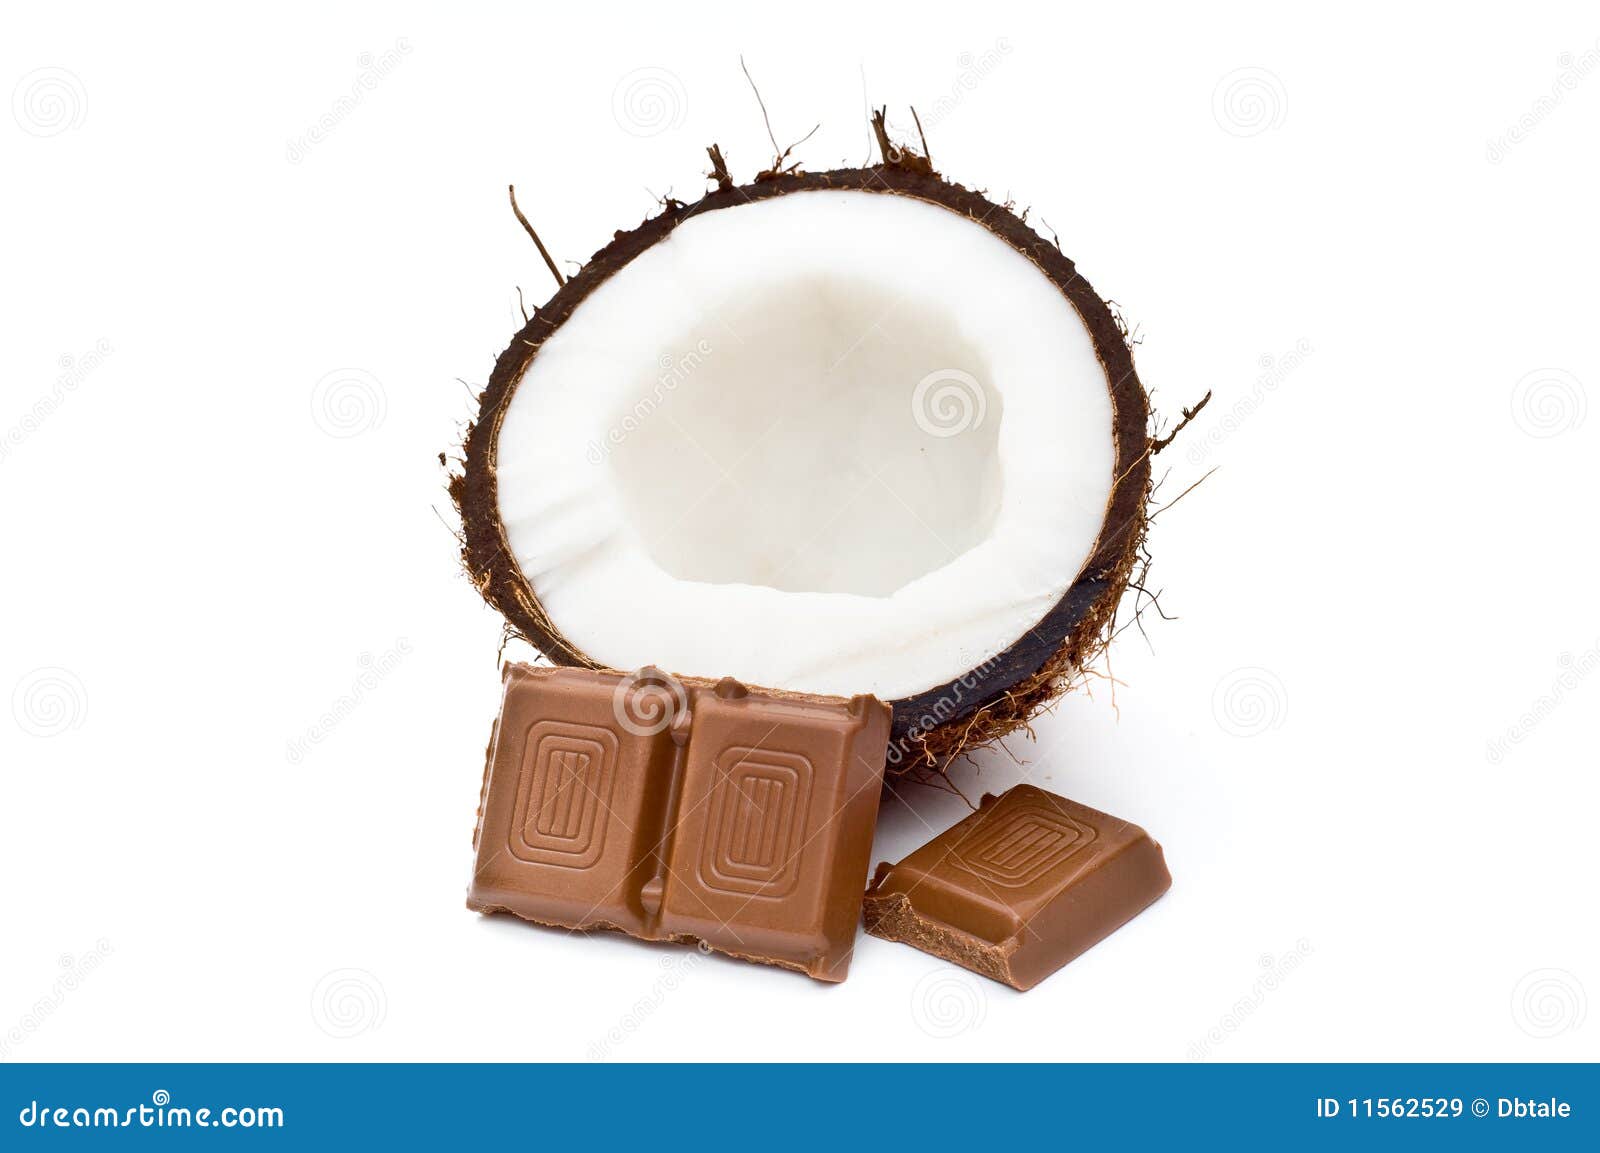 halved coconut with chocolate